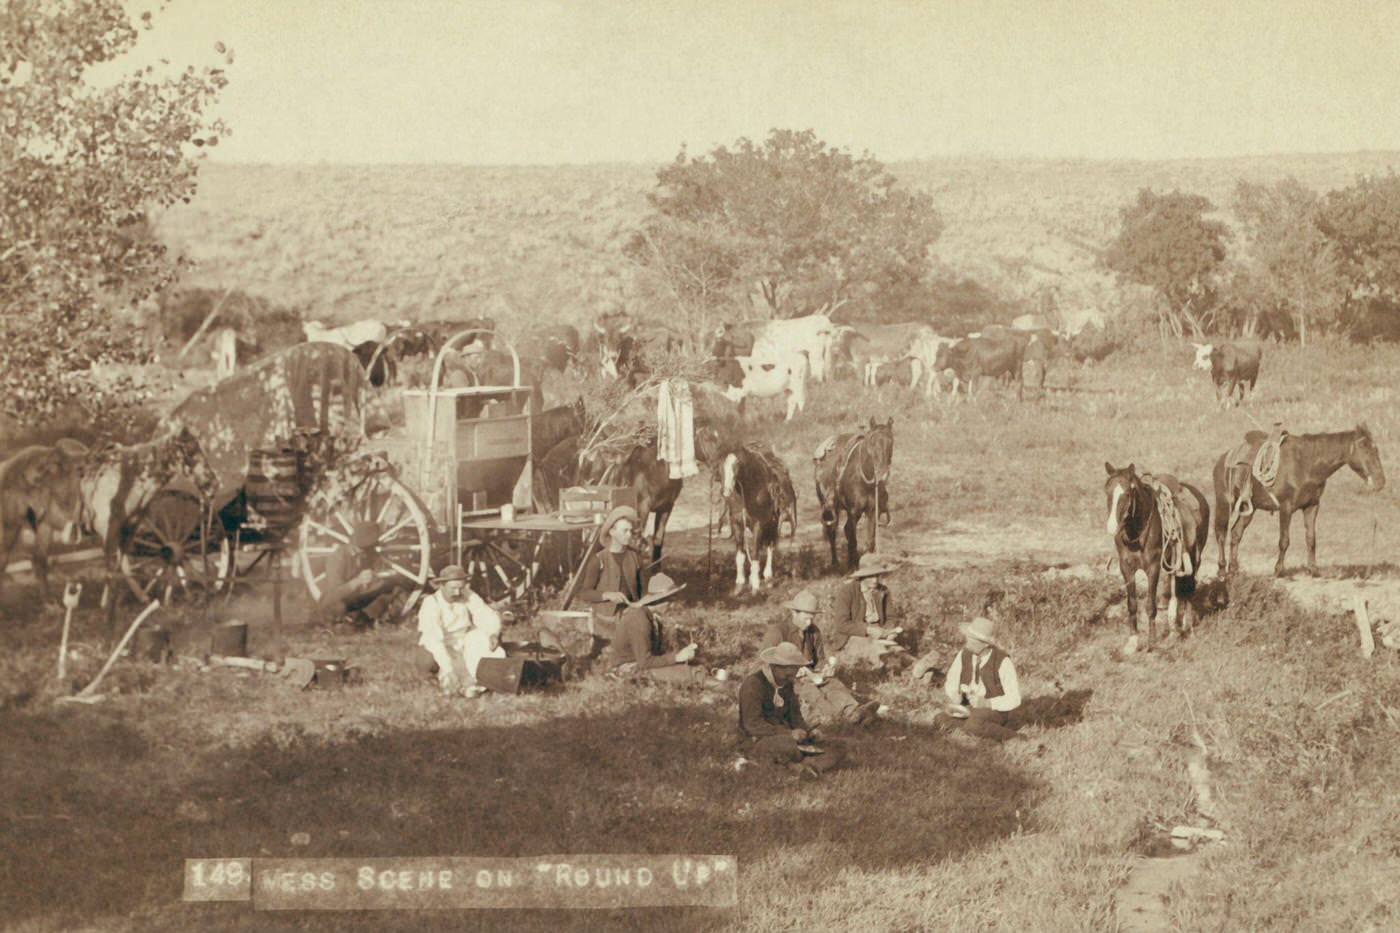 Mess scene on "round up", United States, 1890: Cowboys eating near chuck wagon; small groups of horses and cattle in campsite.